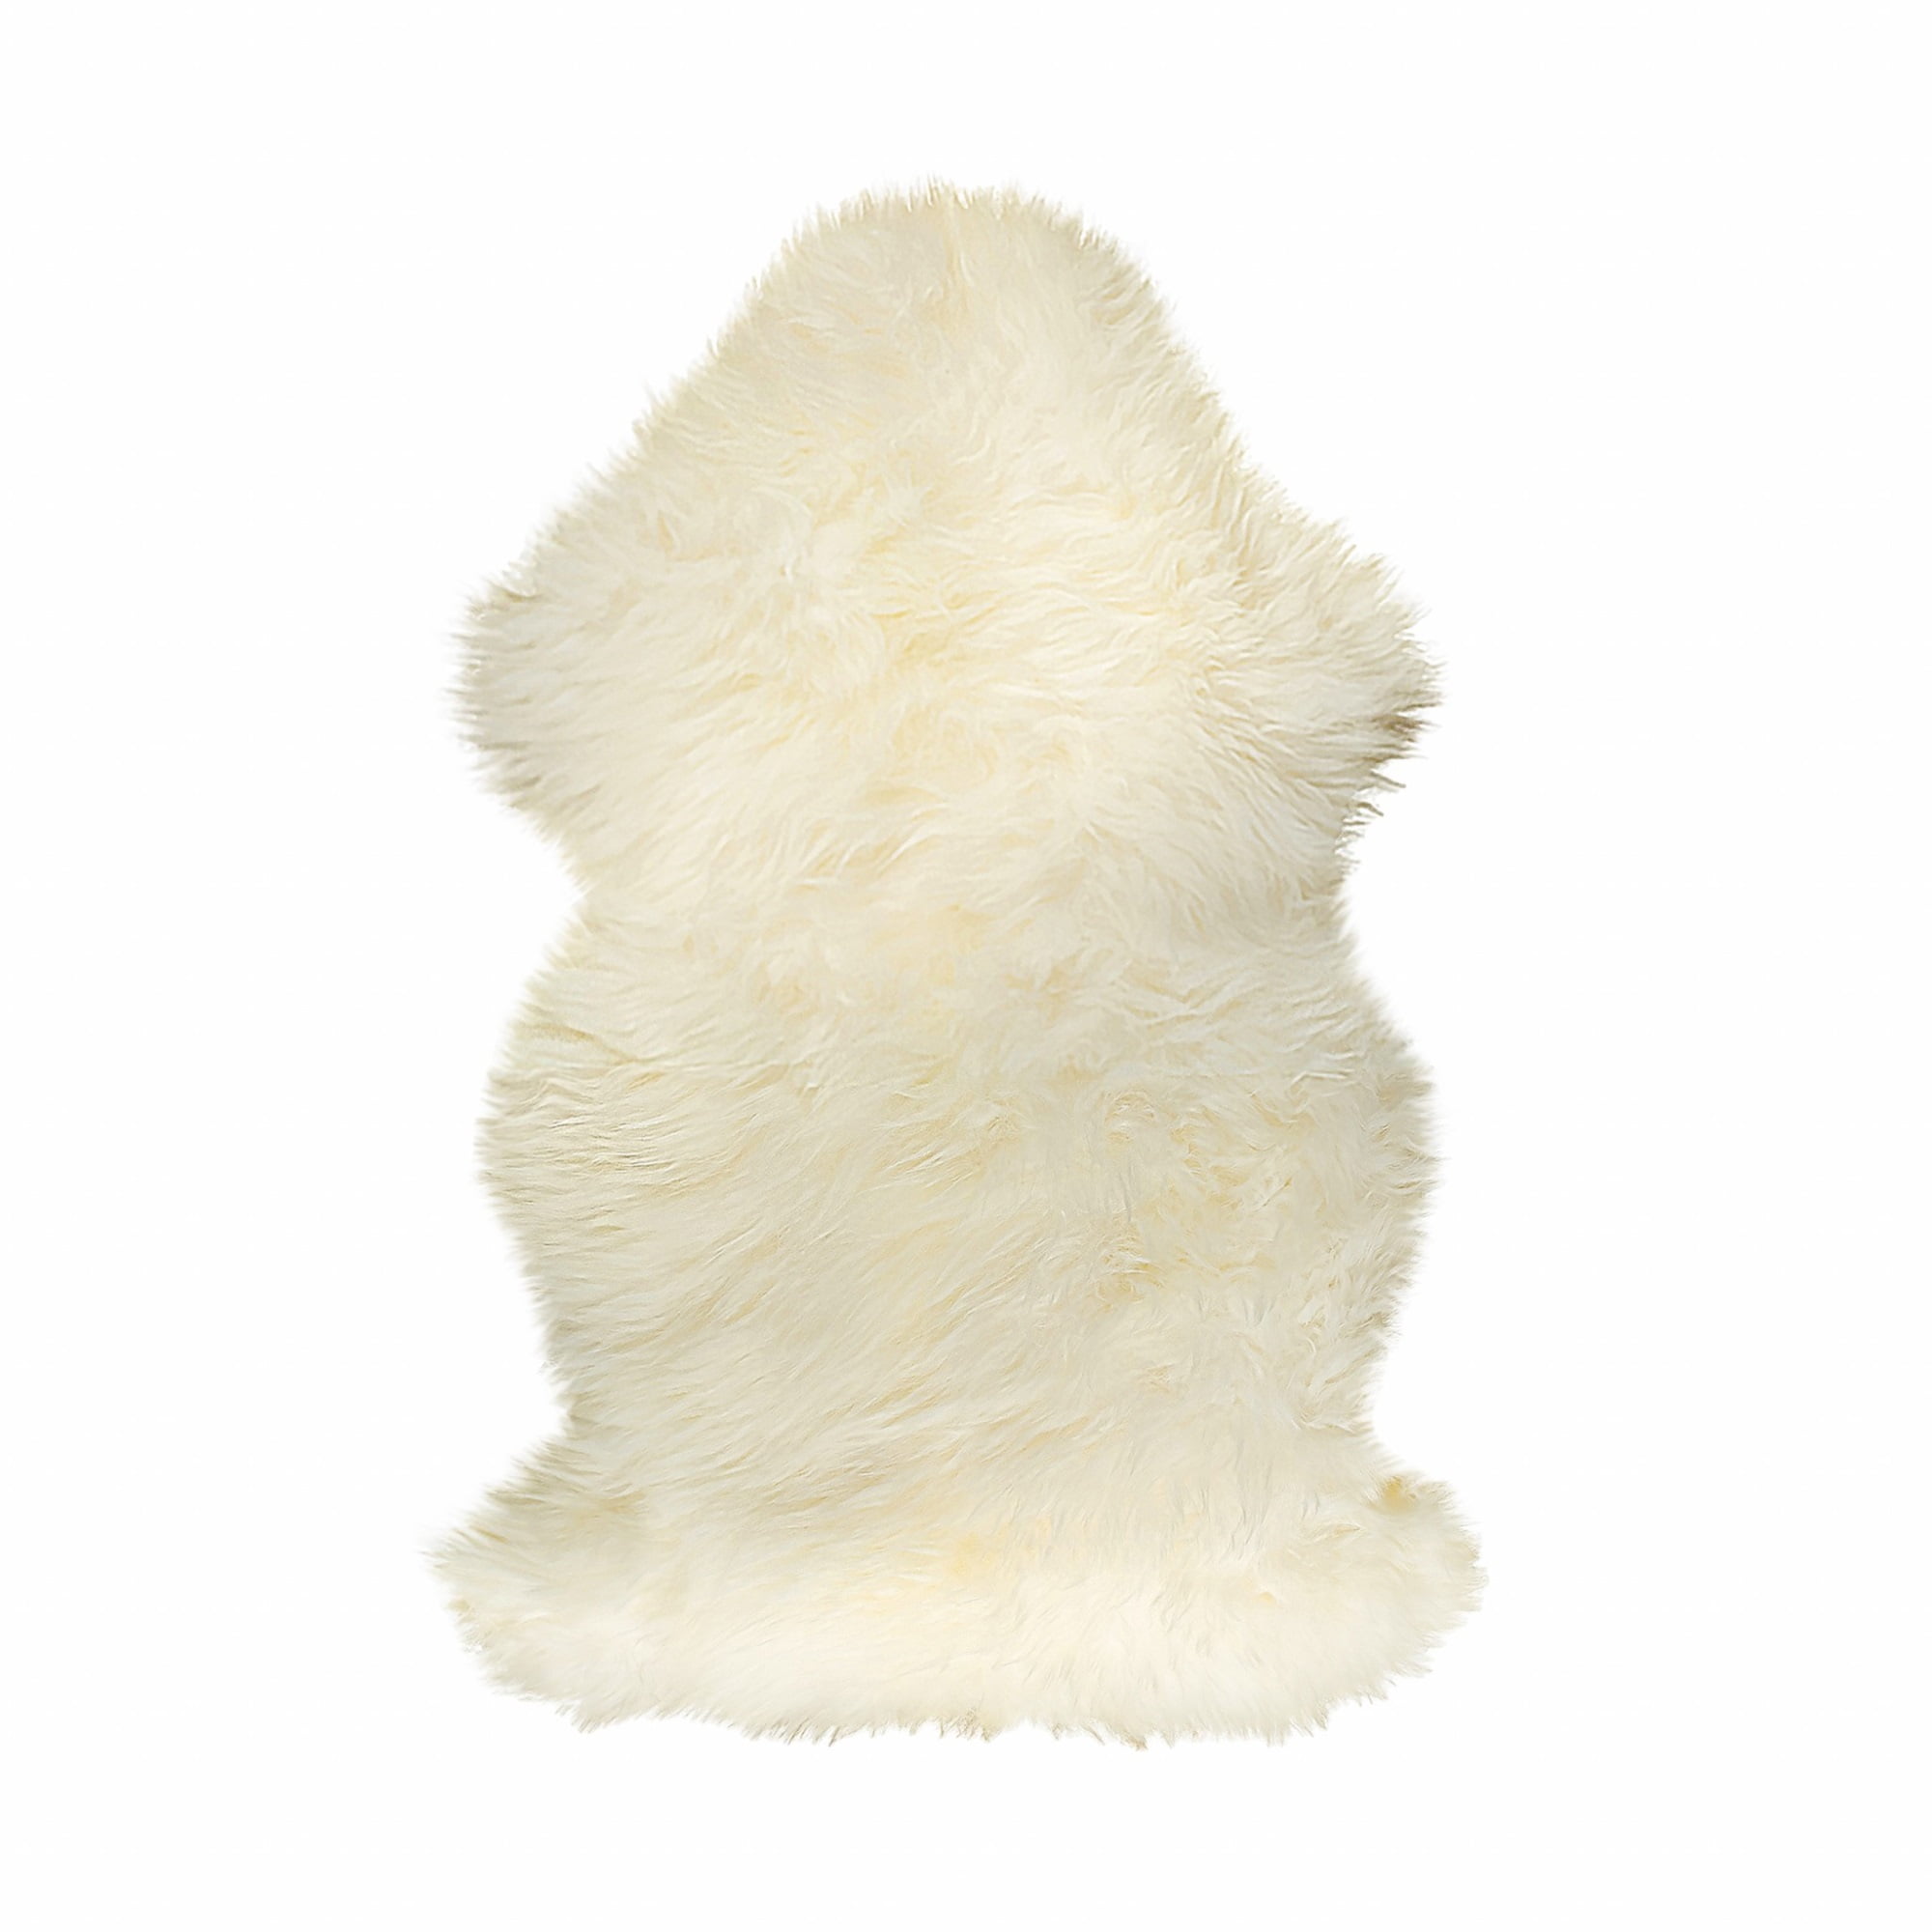 Eco real fur sheep skins clear braun up to 140cm 2 wahl flexible 